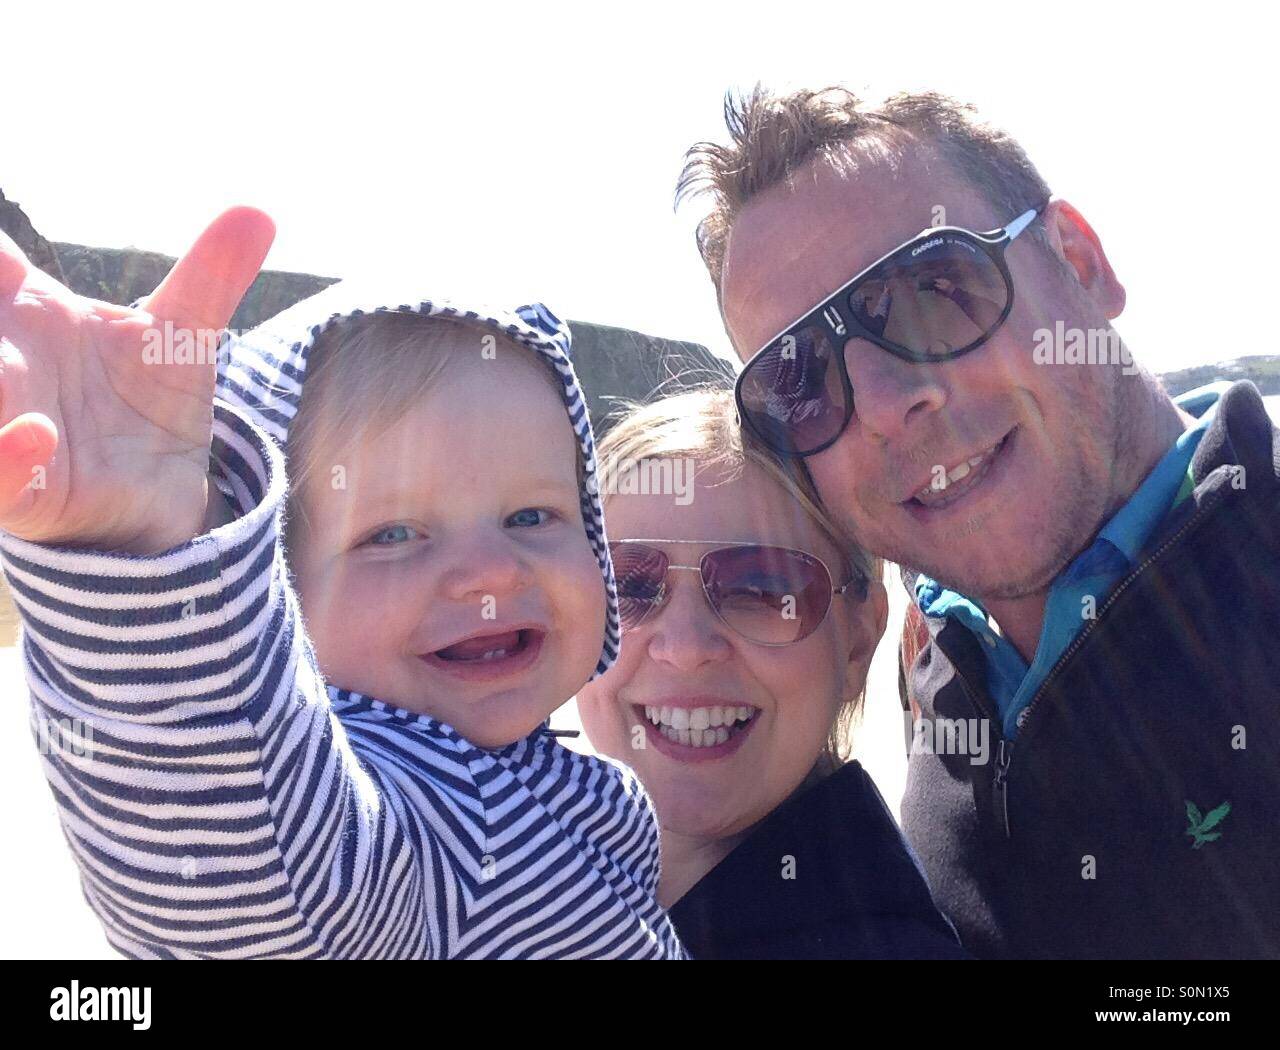 Family selfie on holiday Stock Photo